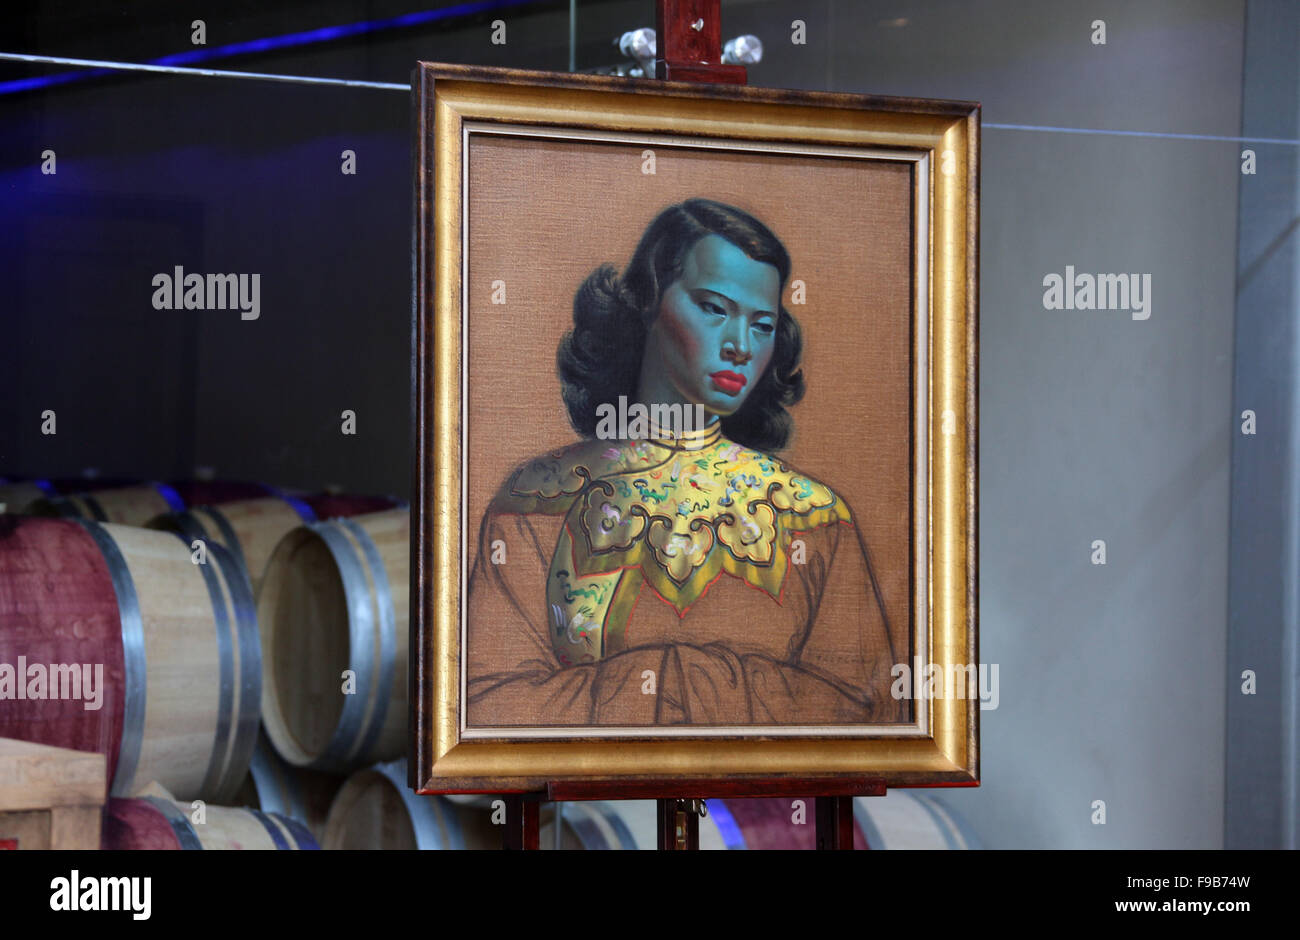 Iconic original painting of the Chinese Girl by Vladimir Tretchikoff on display at Delaire Graff Wine Estate in South Africa Stock Photo